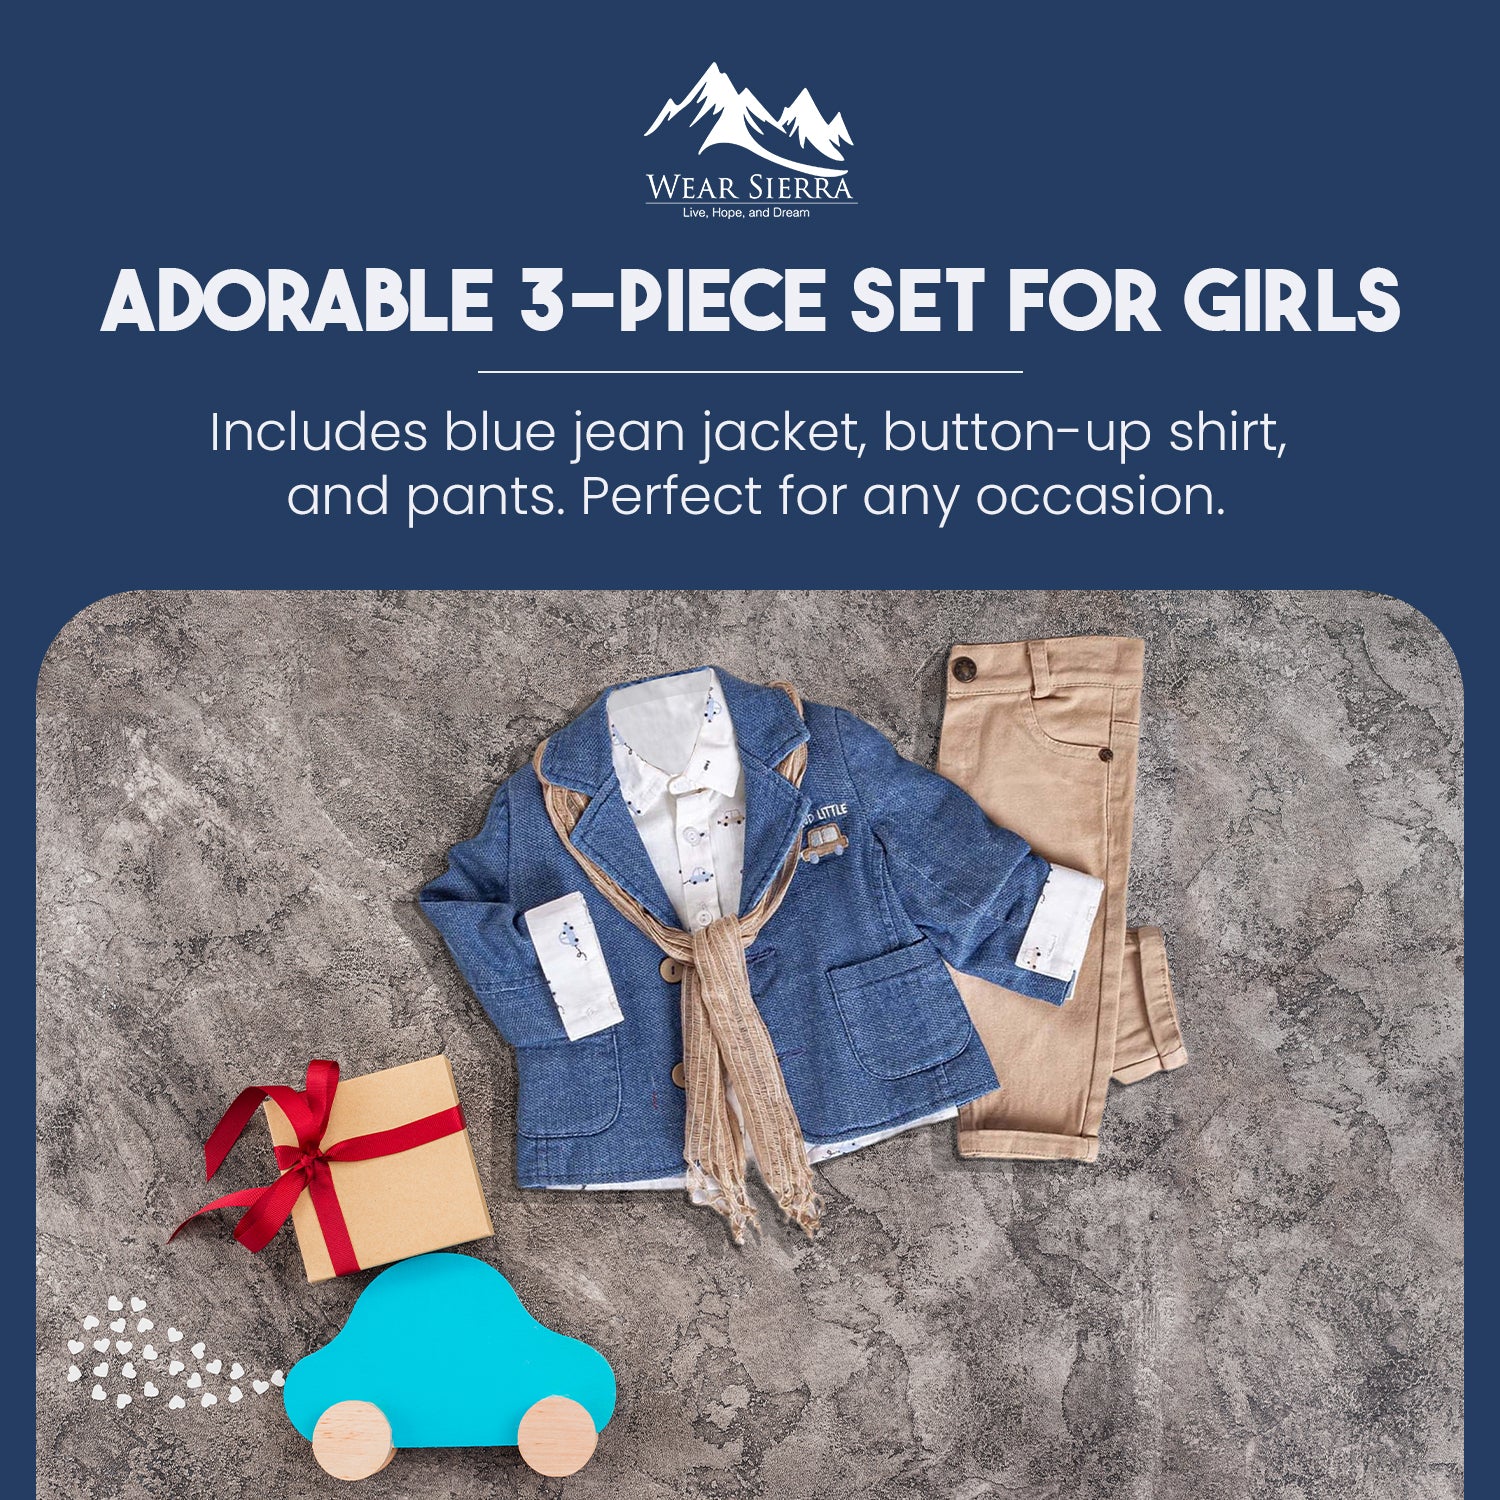 Infant and Toddler Boys' Adorable Blue Jean Jacket, Button-Up Shirt and Pants 3-Piece Set